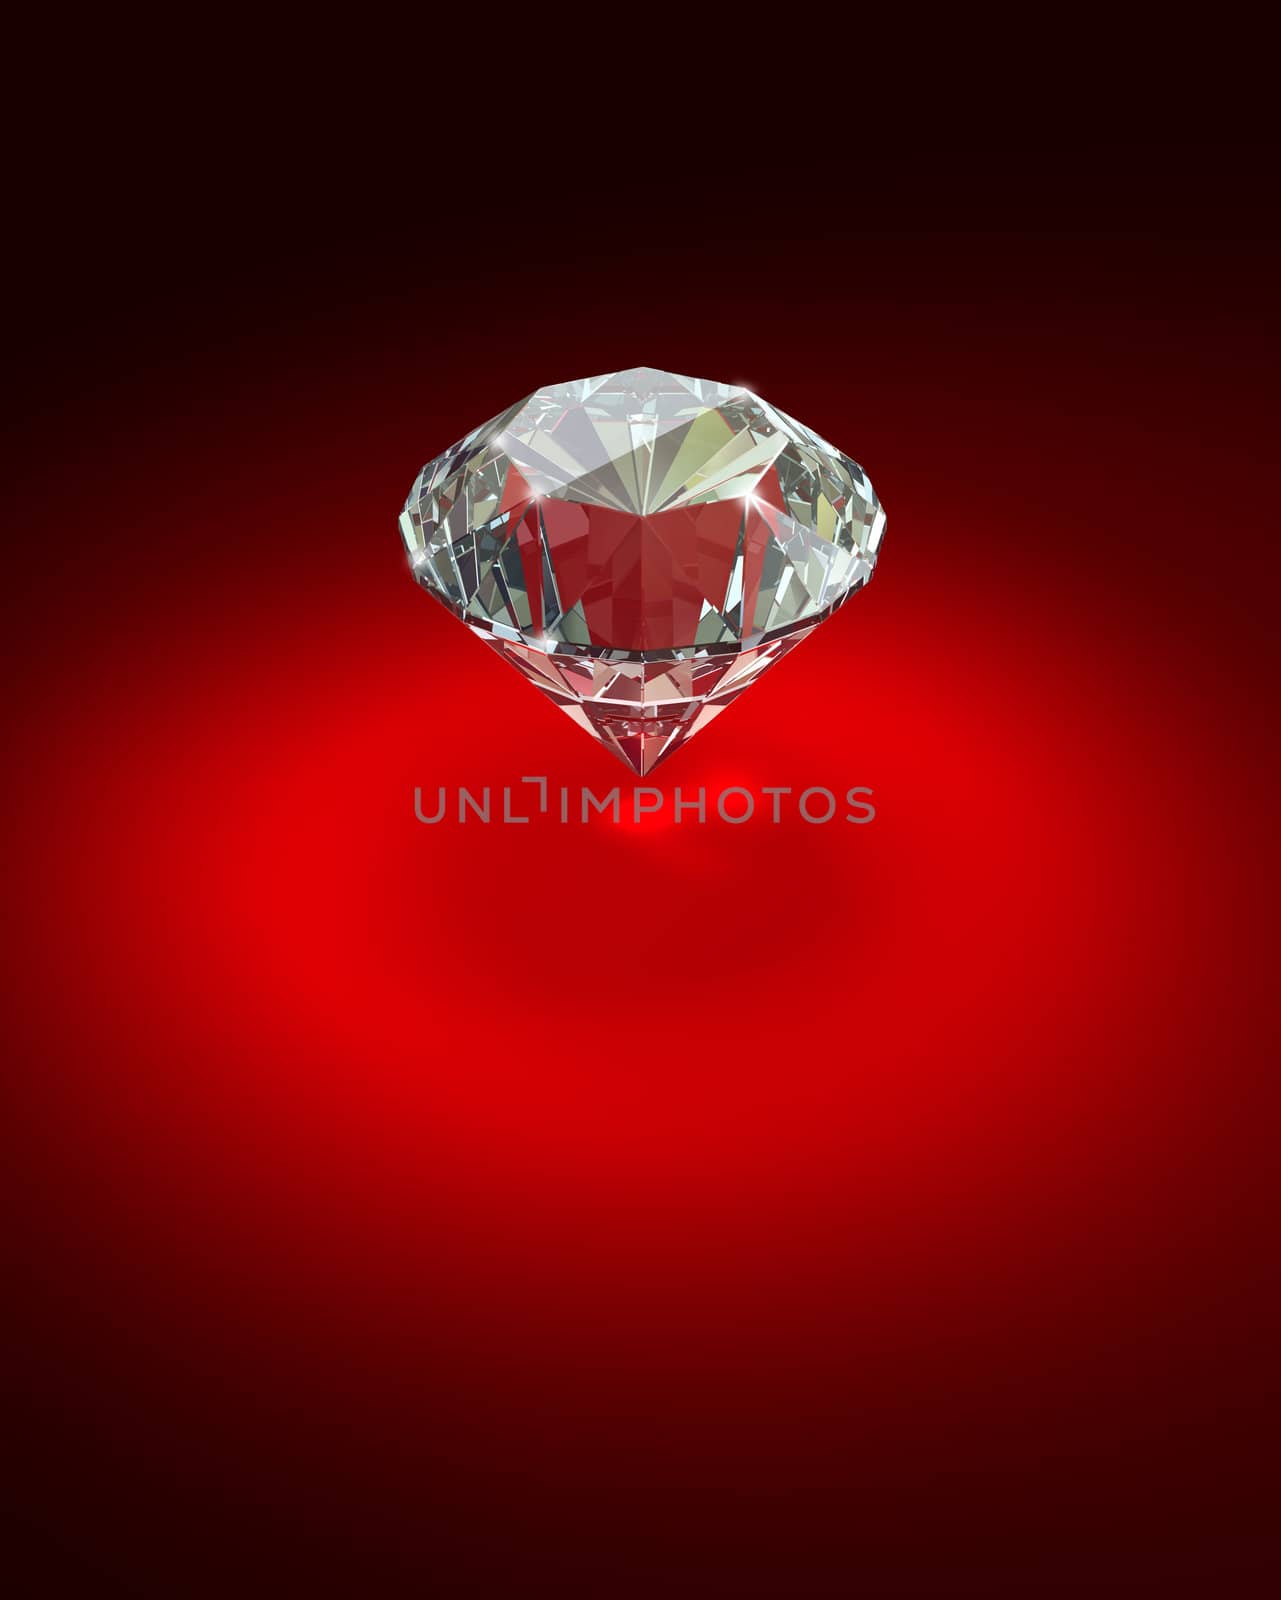 Bright diamond on red background - 3d render image.